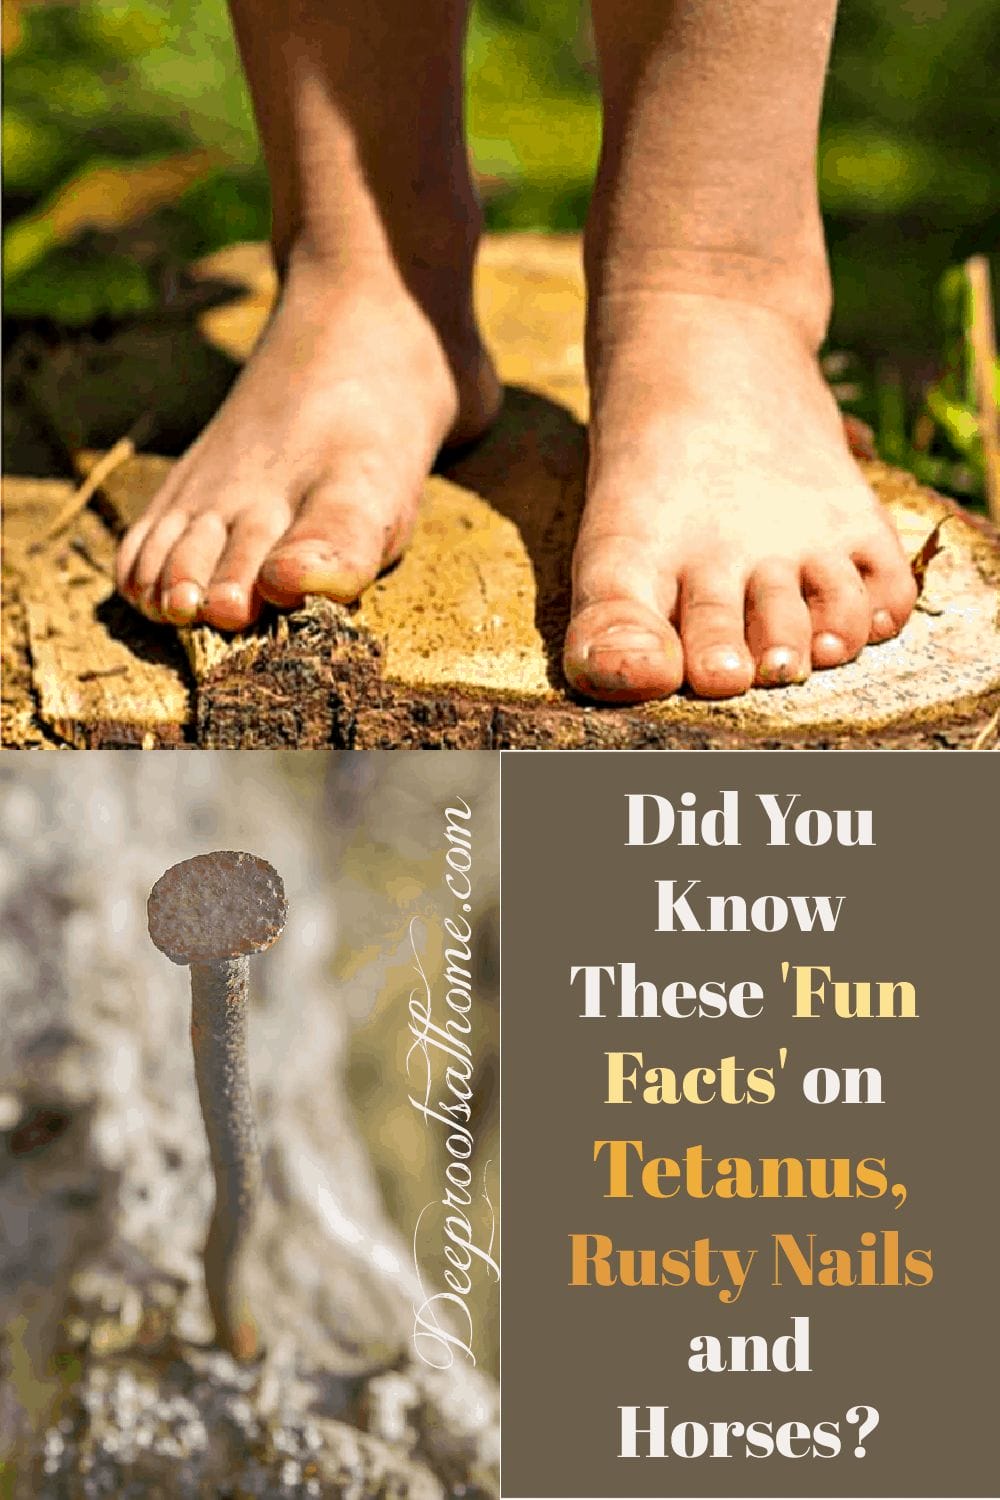 Did You Know These 'Fun Facts' on Tetanus, Rusty Nails and Horses? bare feet 